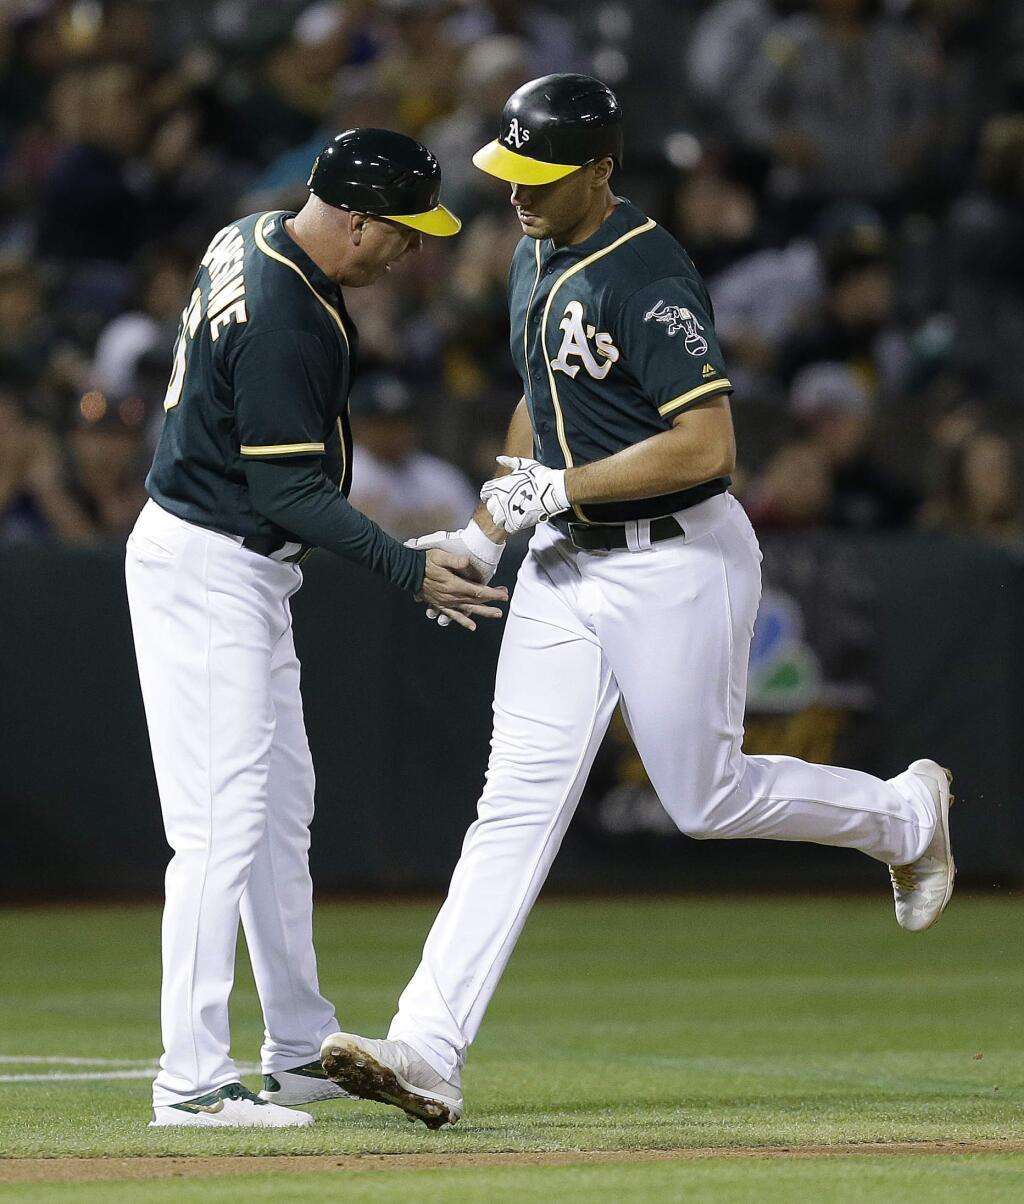 Oakland Athletics' Matt Olson, right, celebrates with third base coach Steve Scarsone after hitting a two run home run off Texas Rangers' Nick Martinez in the second inning of a baseball game Friday, Sept. 22, 2017, in Oakland, Calif. (AP Photo/Ben Margot)